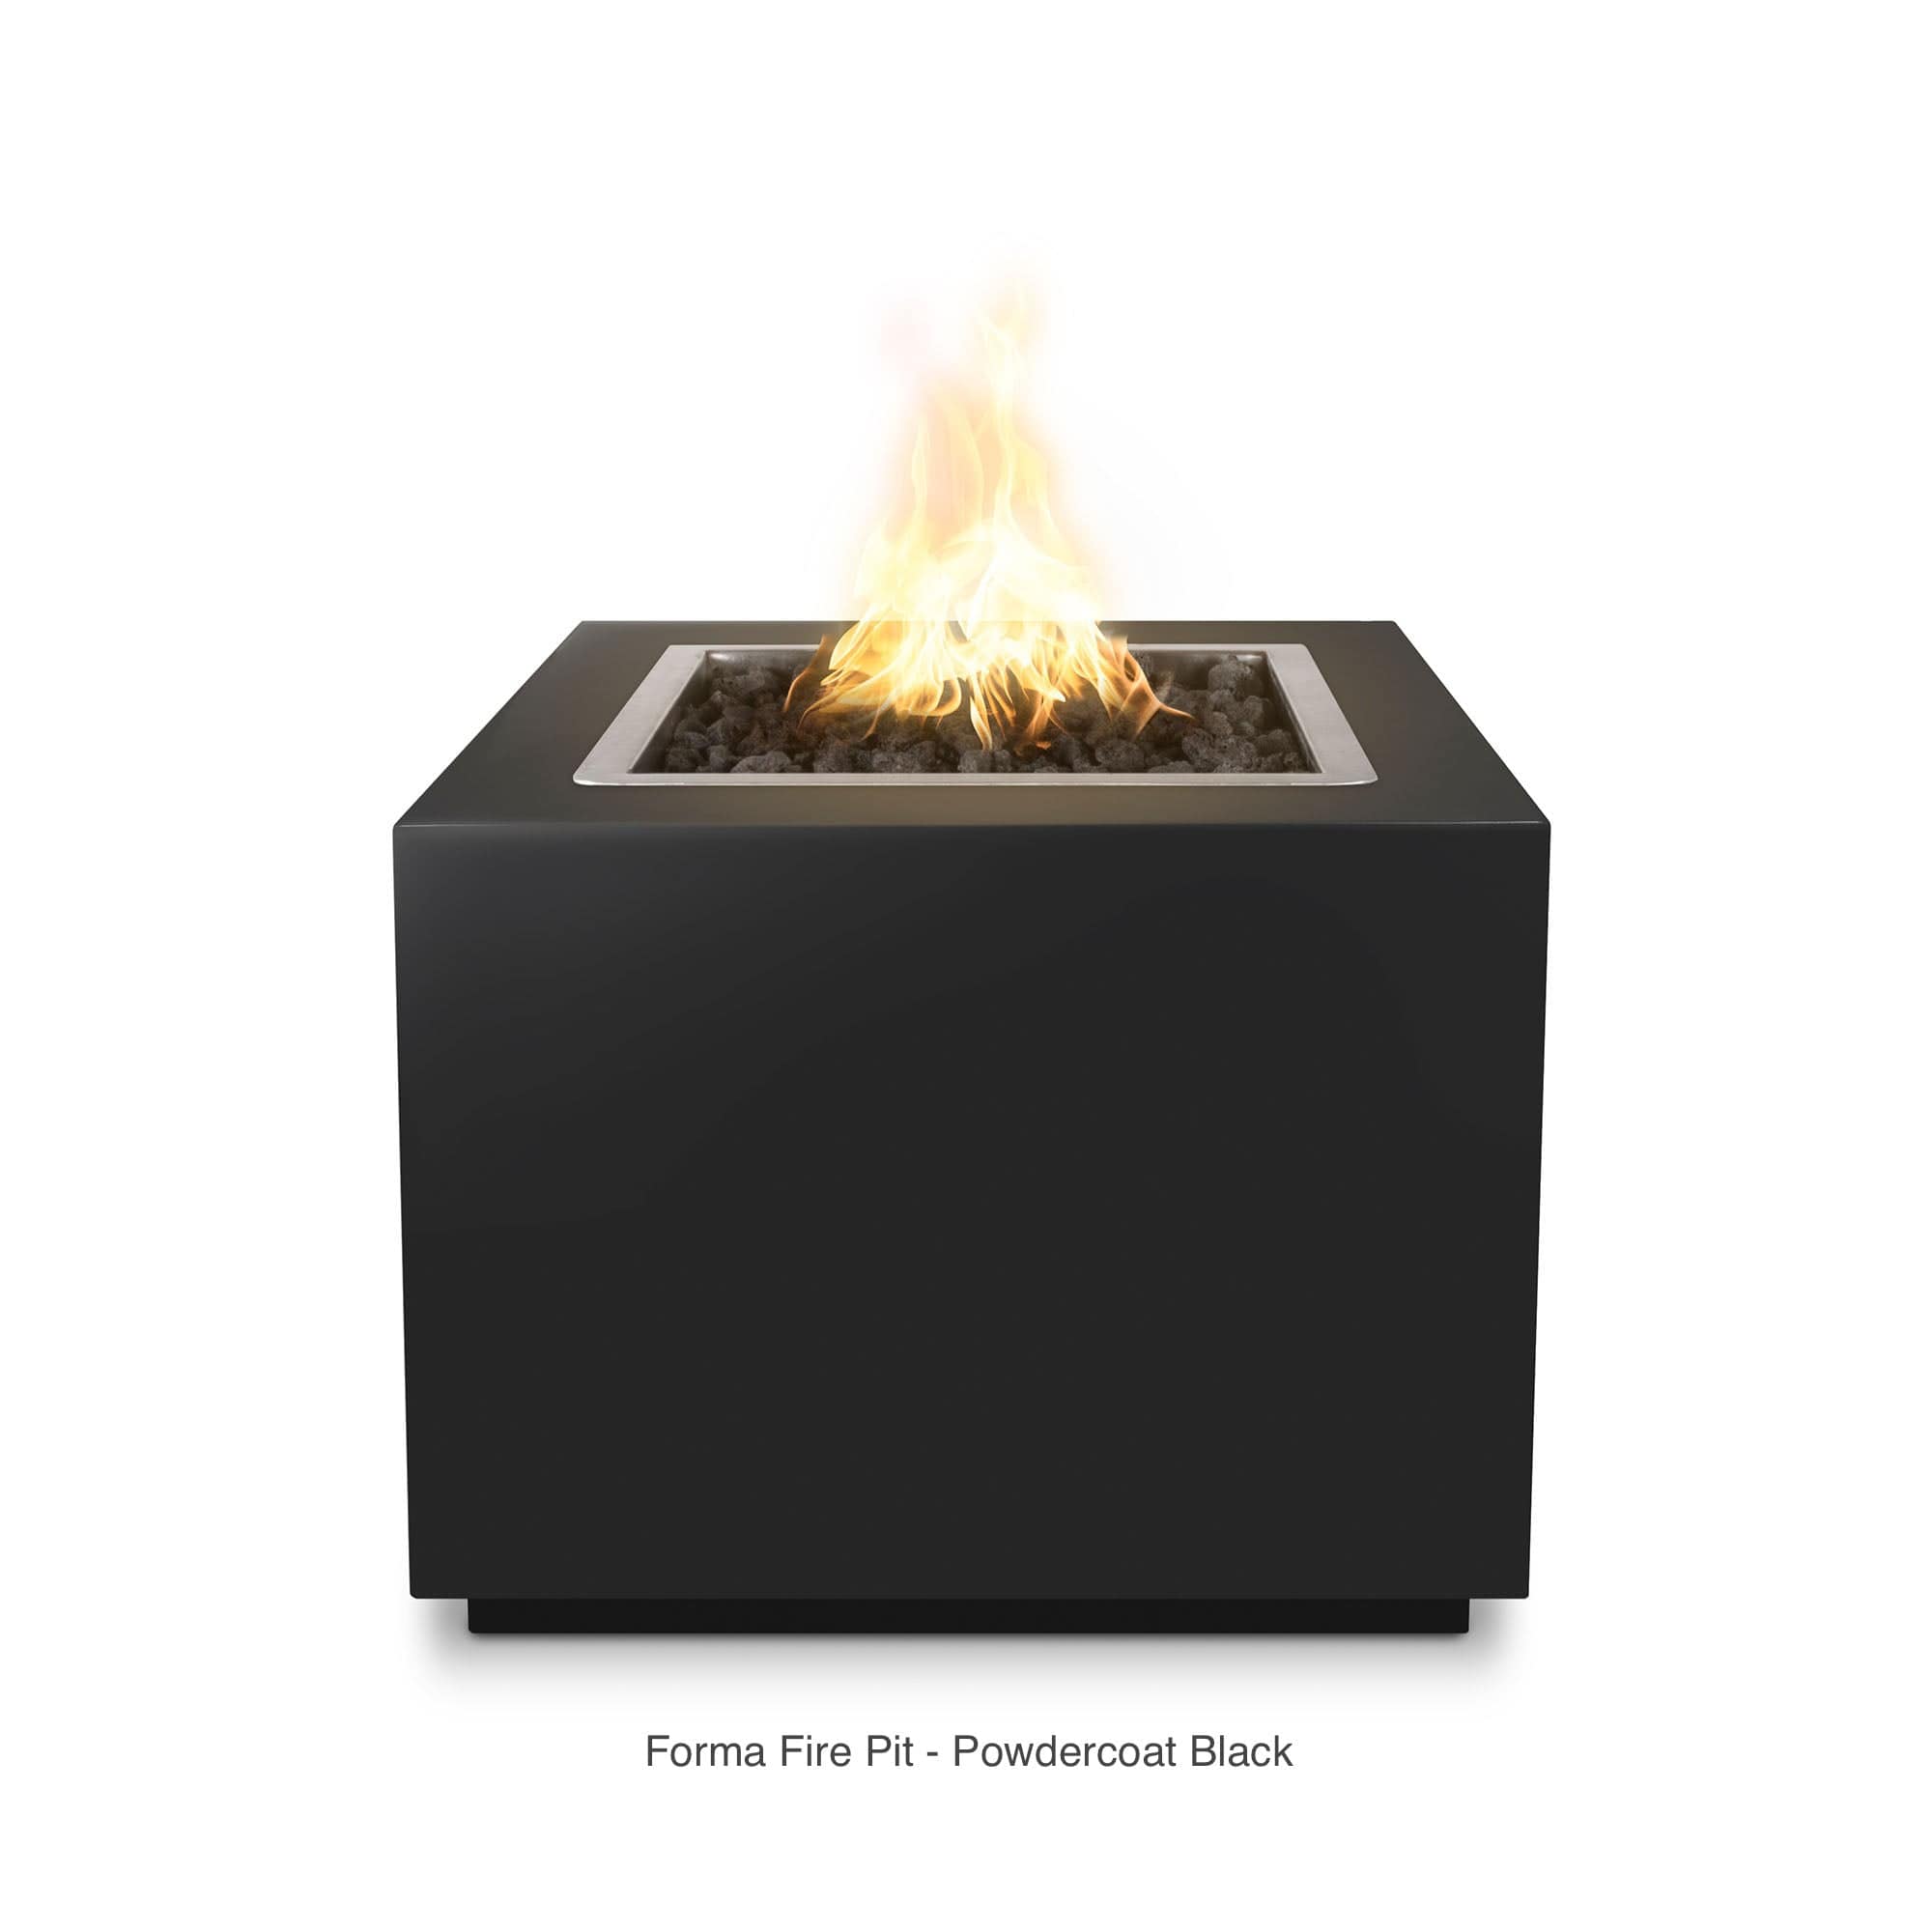 The Outdoor Plus Fire Features The Outdoor Plus 30", 36", 42", 48", 60" Square Forma Fire Pit - Metal Collection / OPT-xxxxSQCPR, OPT-xxxxSQCS, OPT-xxxxSQSS, OPT-xxPCSQ